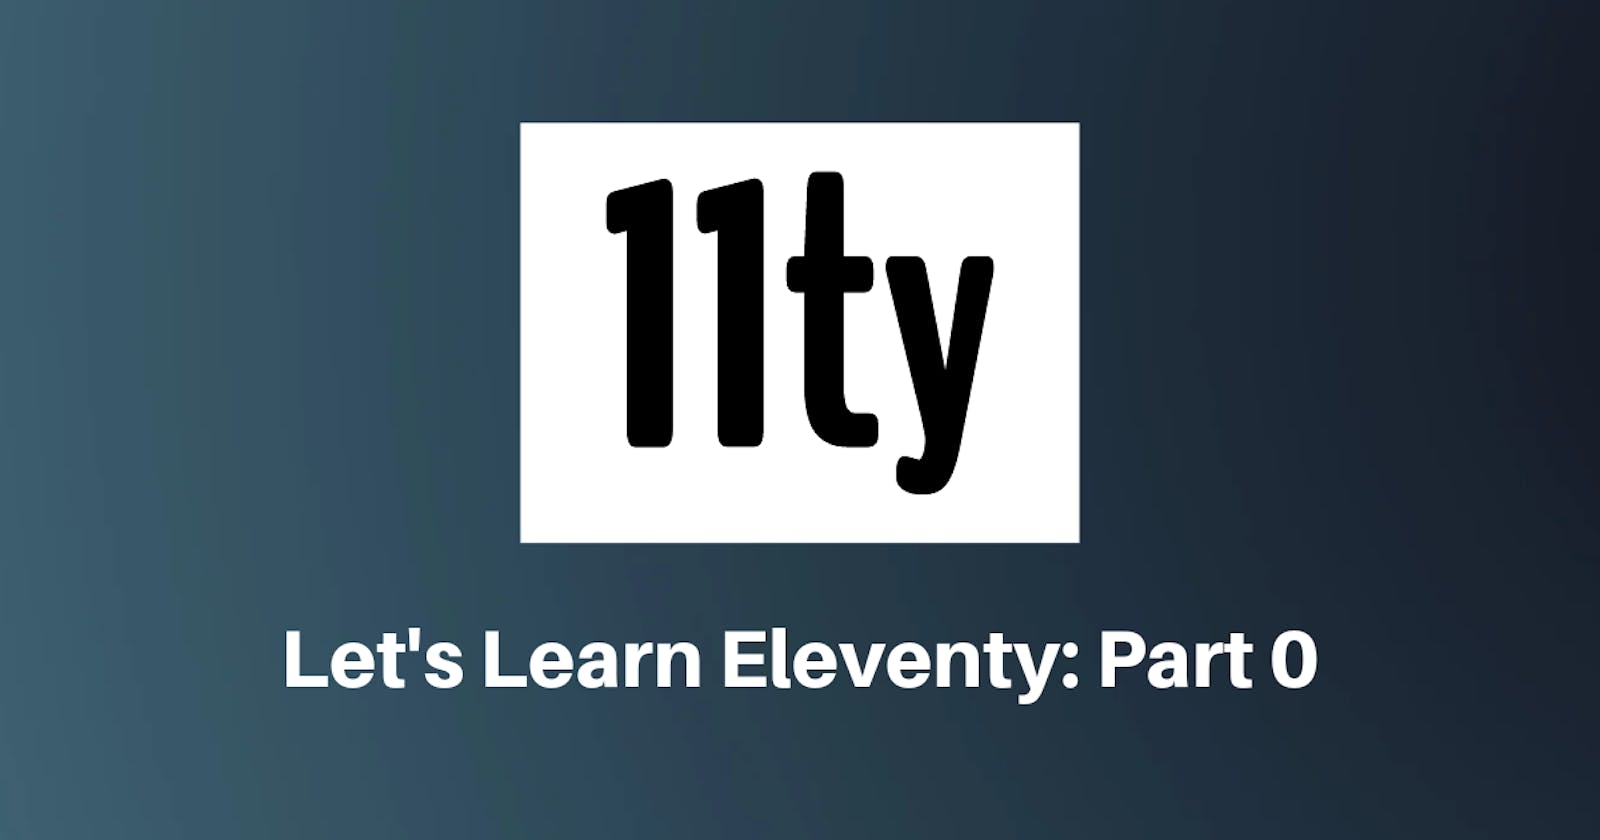 Let's Learn Eleventy